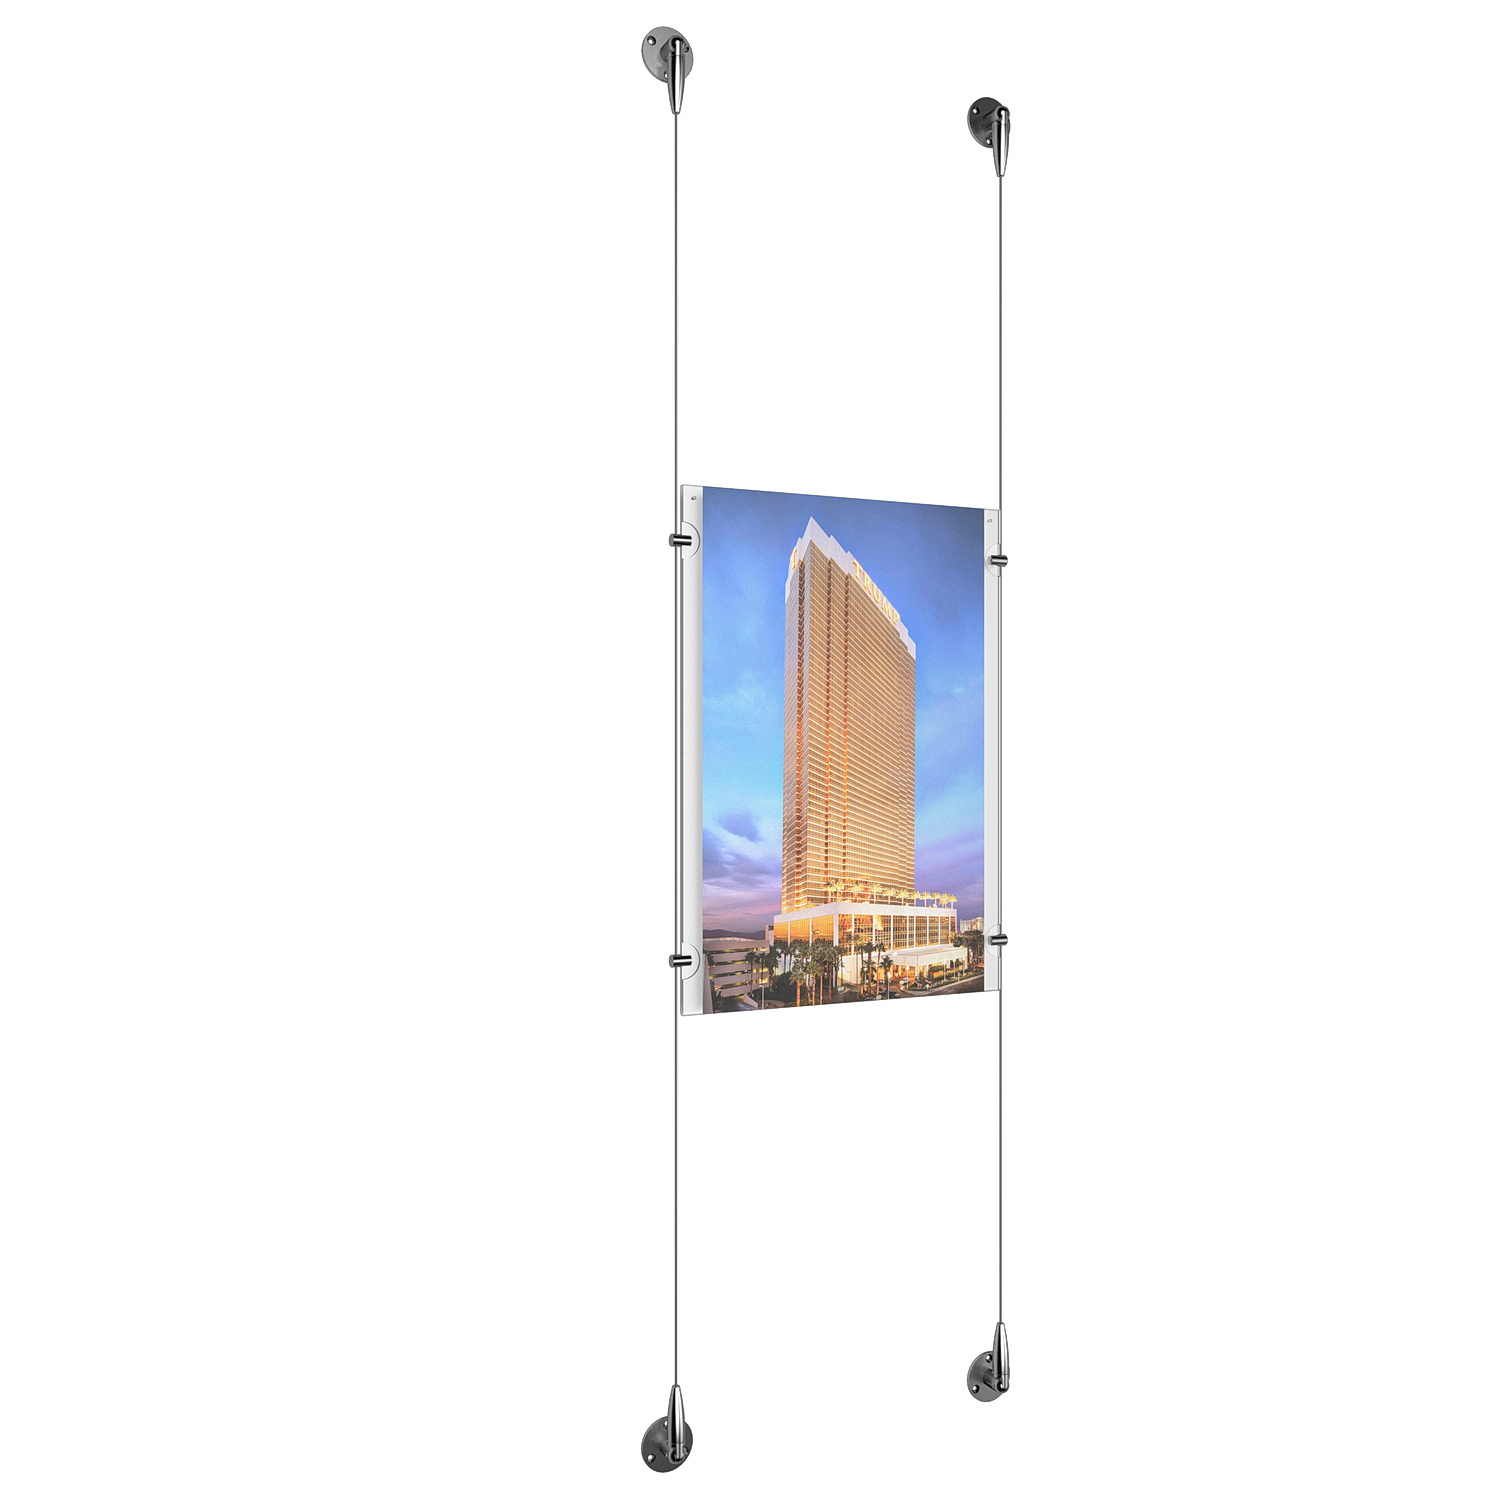 (1) 11'' Width x 17'' Height Clear Acrylic Frame & (2) Aluminum Chrome Polished Adjustable Angle Signature Cable Systems with (4) Single-Sided Panel Grippers